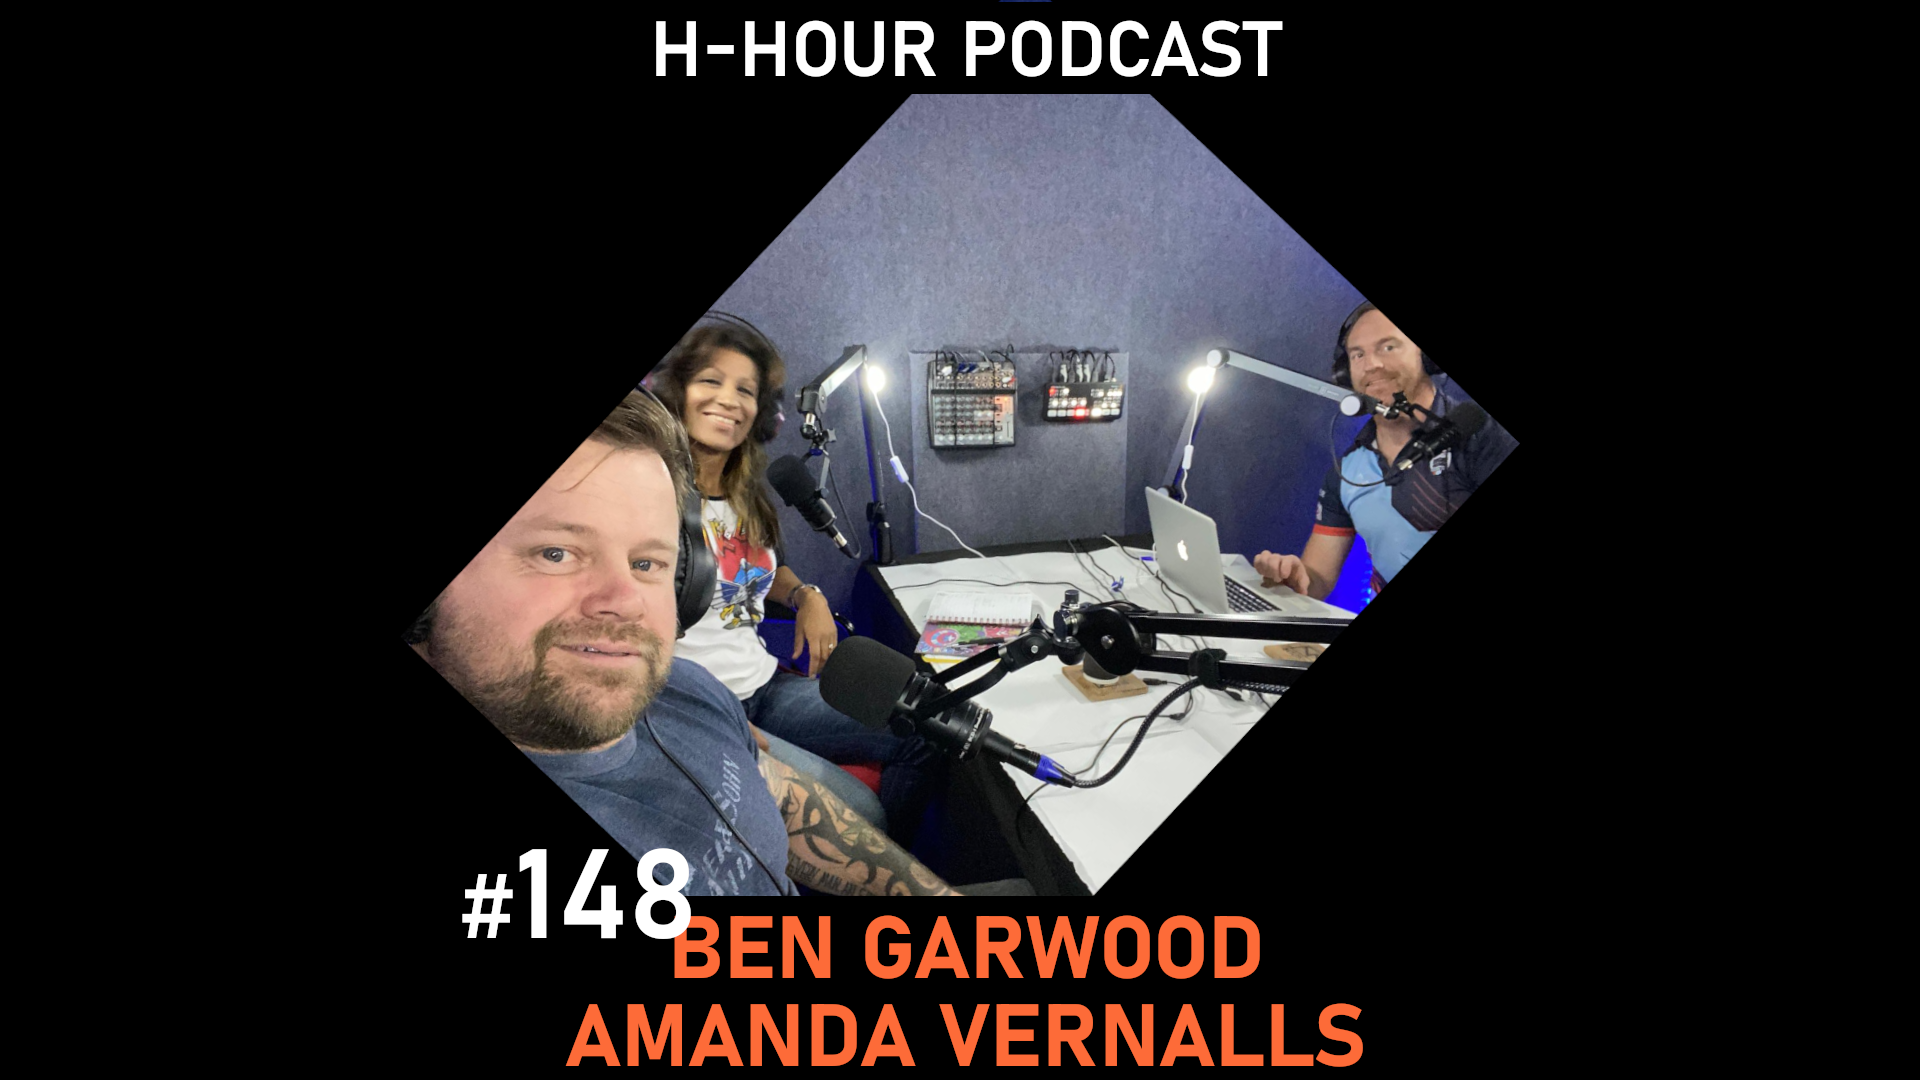 hugh keir amanda vernalls and ben garwood on the h-hour podcast discussing new series by hr4k called Own It